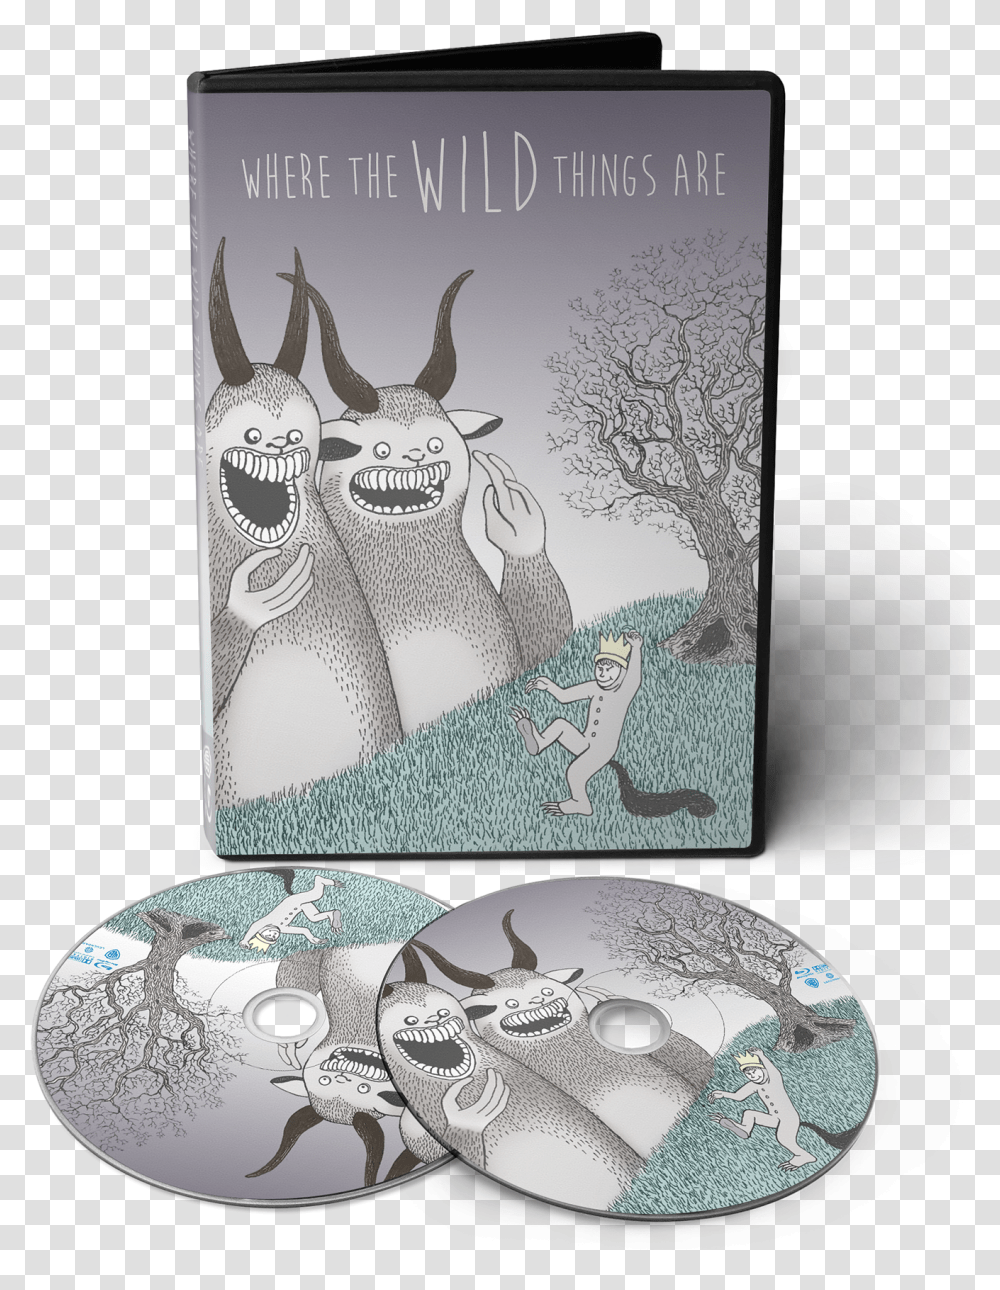 Where The Wild Things Are Illustration, Disk, Dvd, Bird, Animal Transparent Png